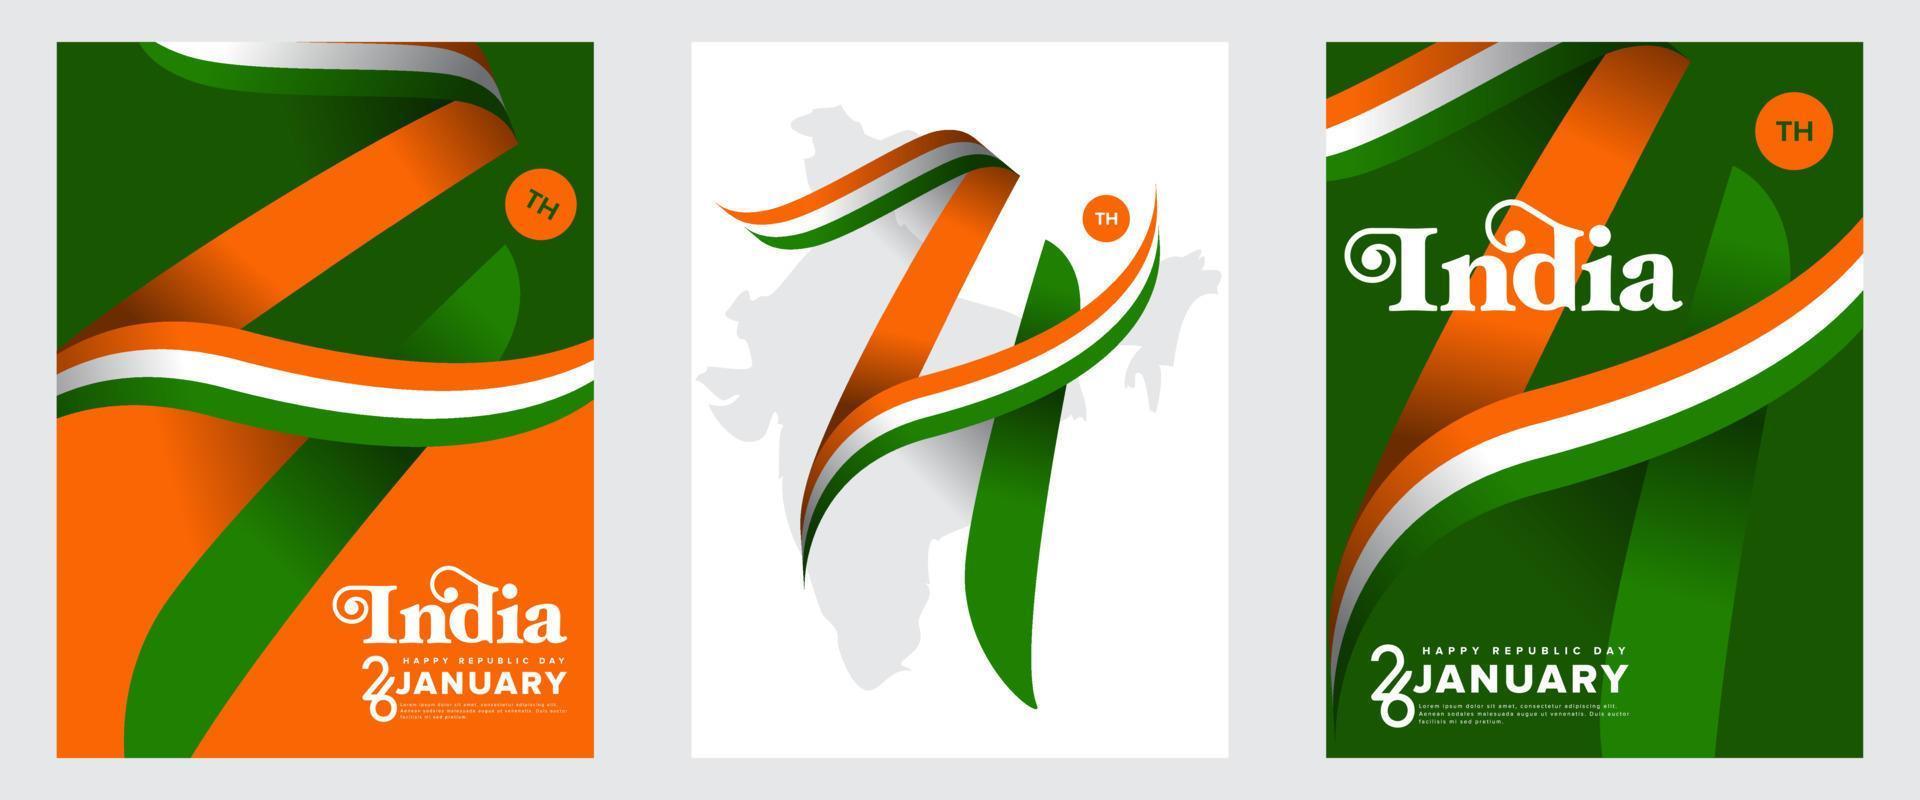 74 th India Republic day flag number vector for greeting card, background, poster, banner set collection